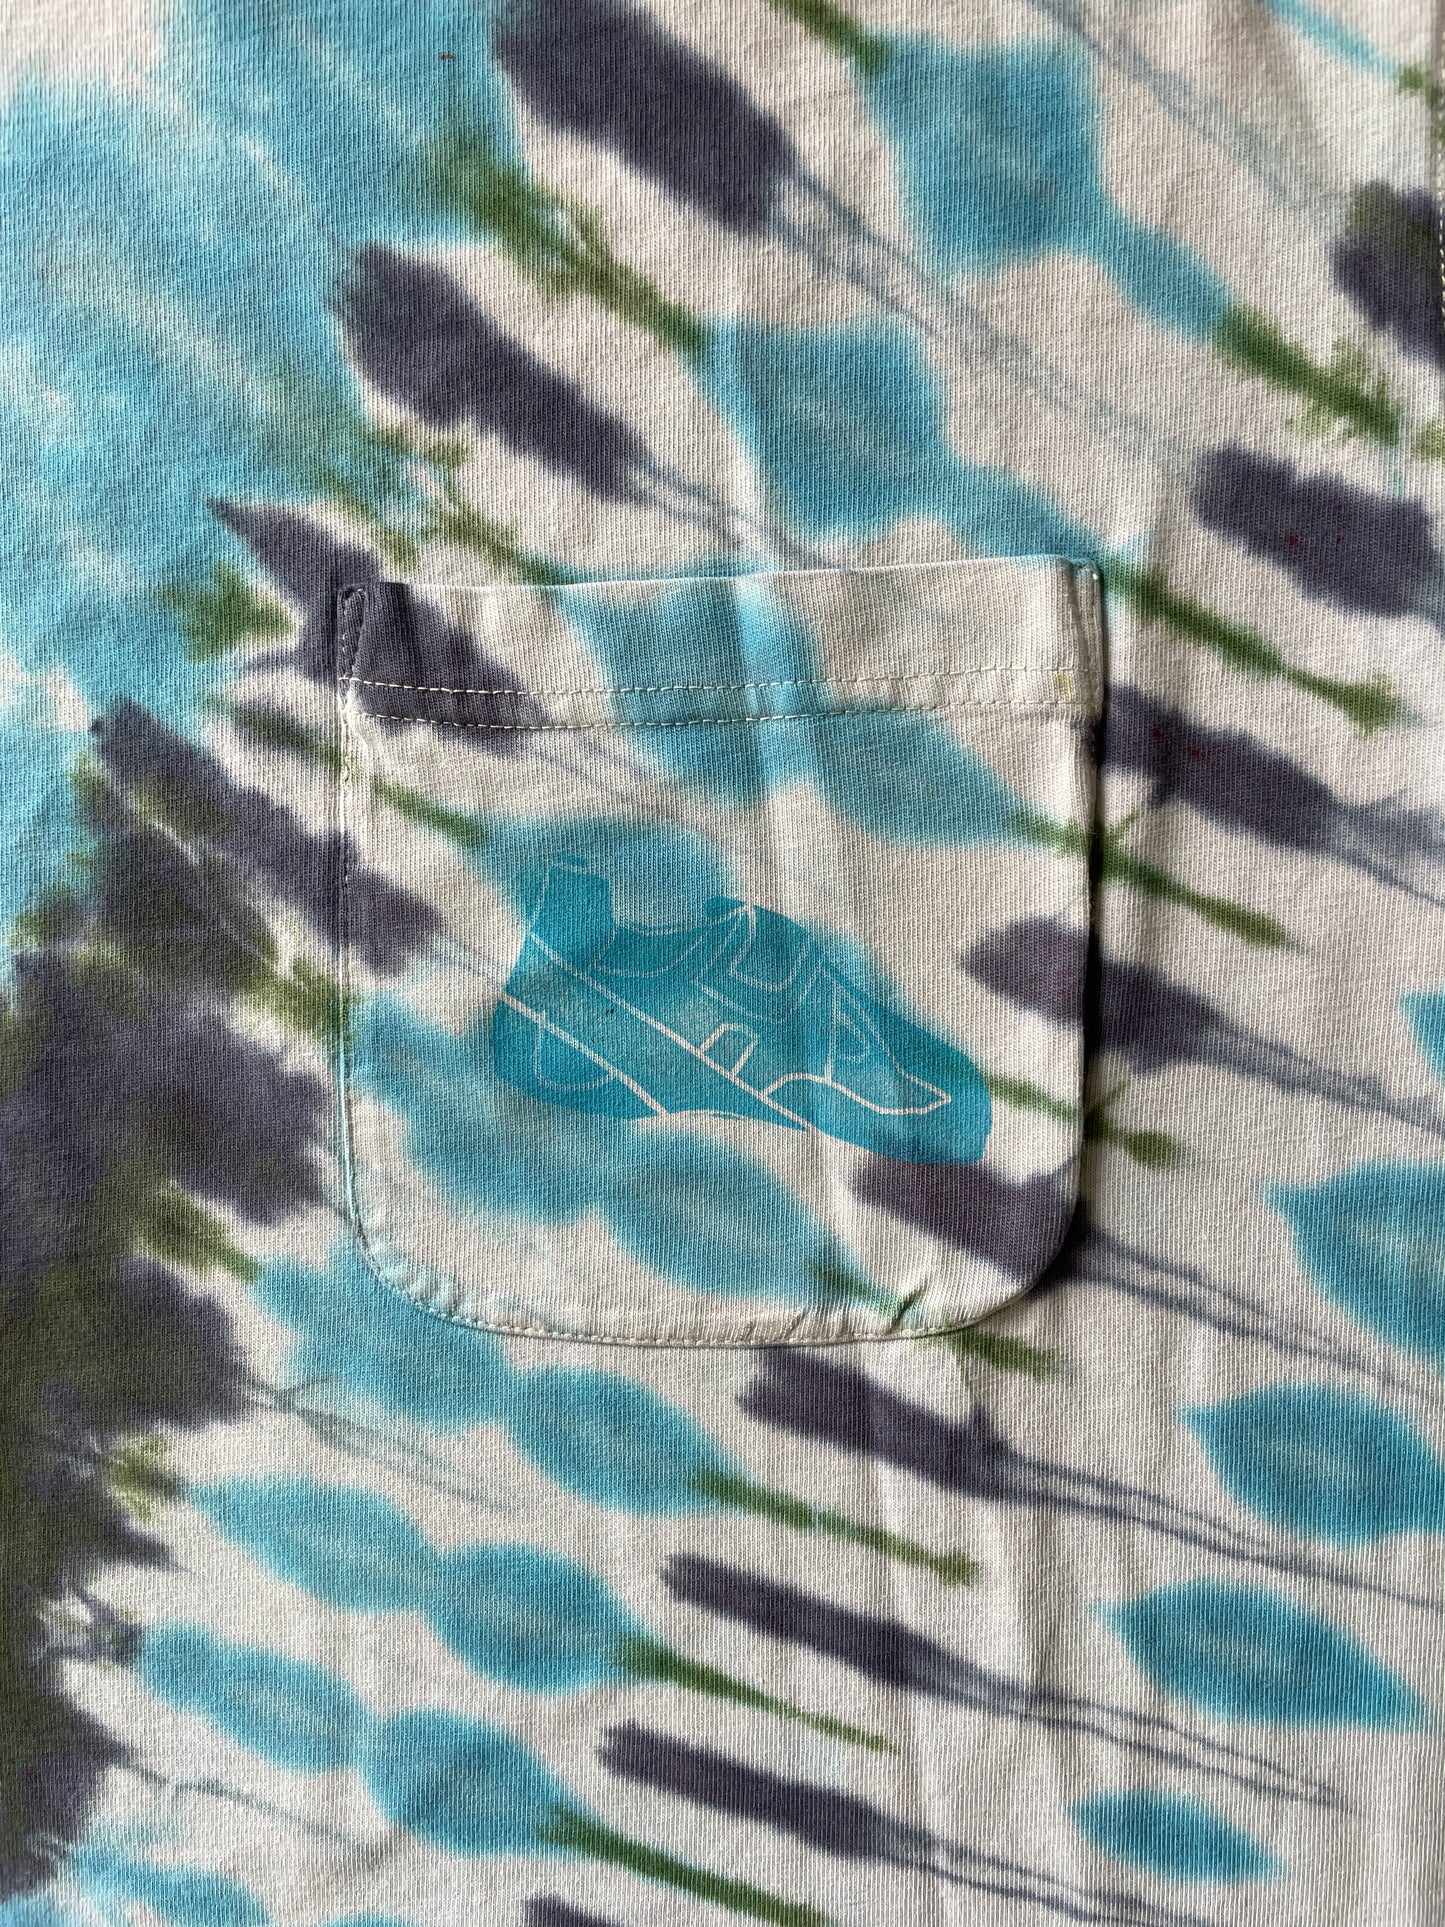 LARGE Men’s Eddie Bauer Climbing Shoe Handmade Tie Dyed T-Shirt | One-Of-a-Kind Sky Blue and Forest Green Pleated Short Sleeve